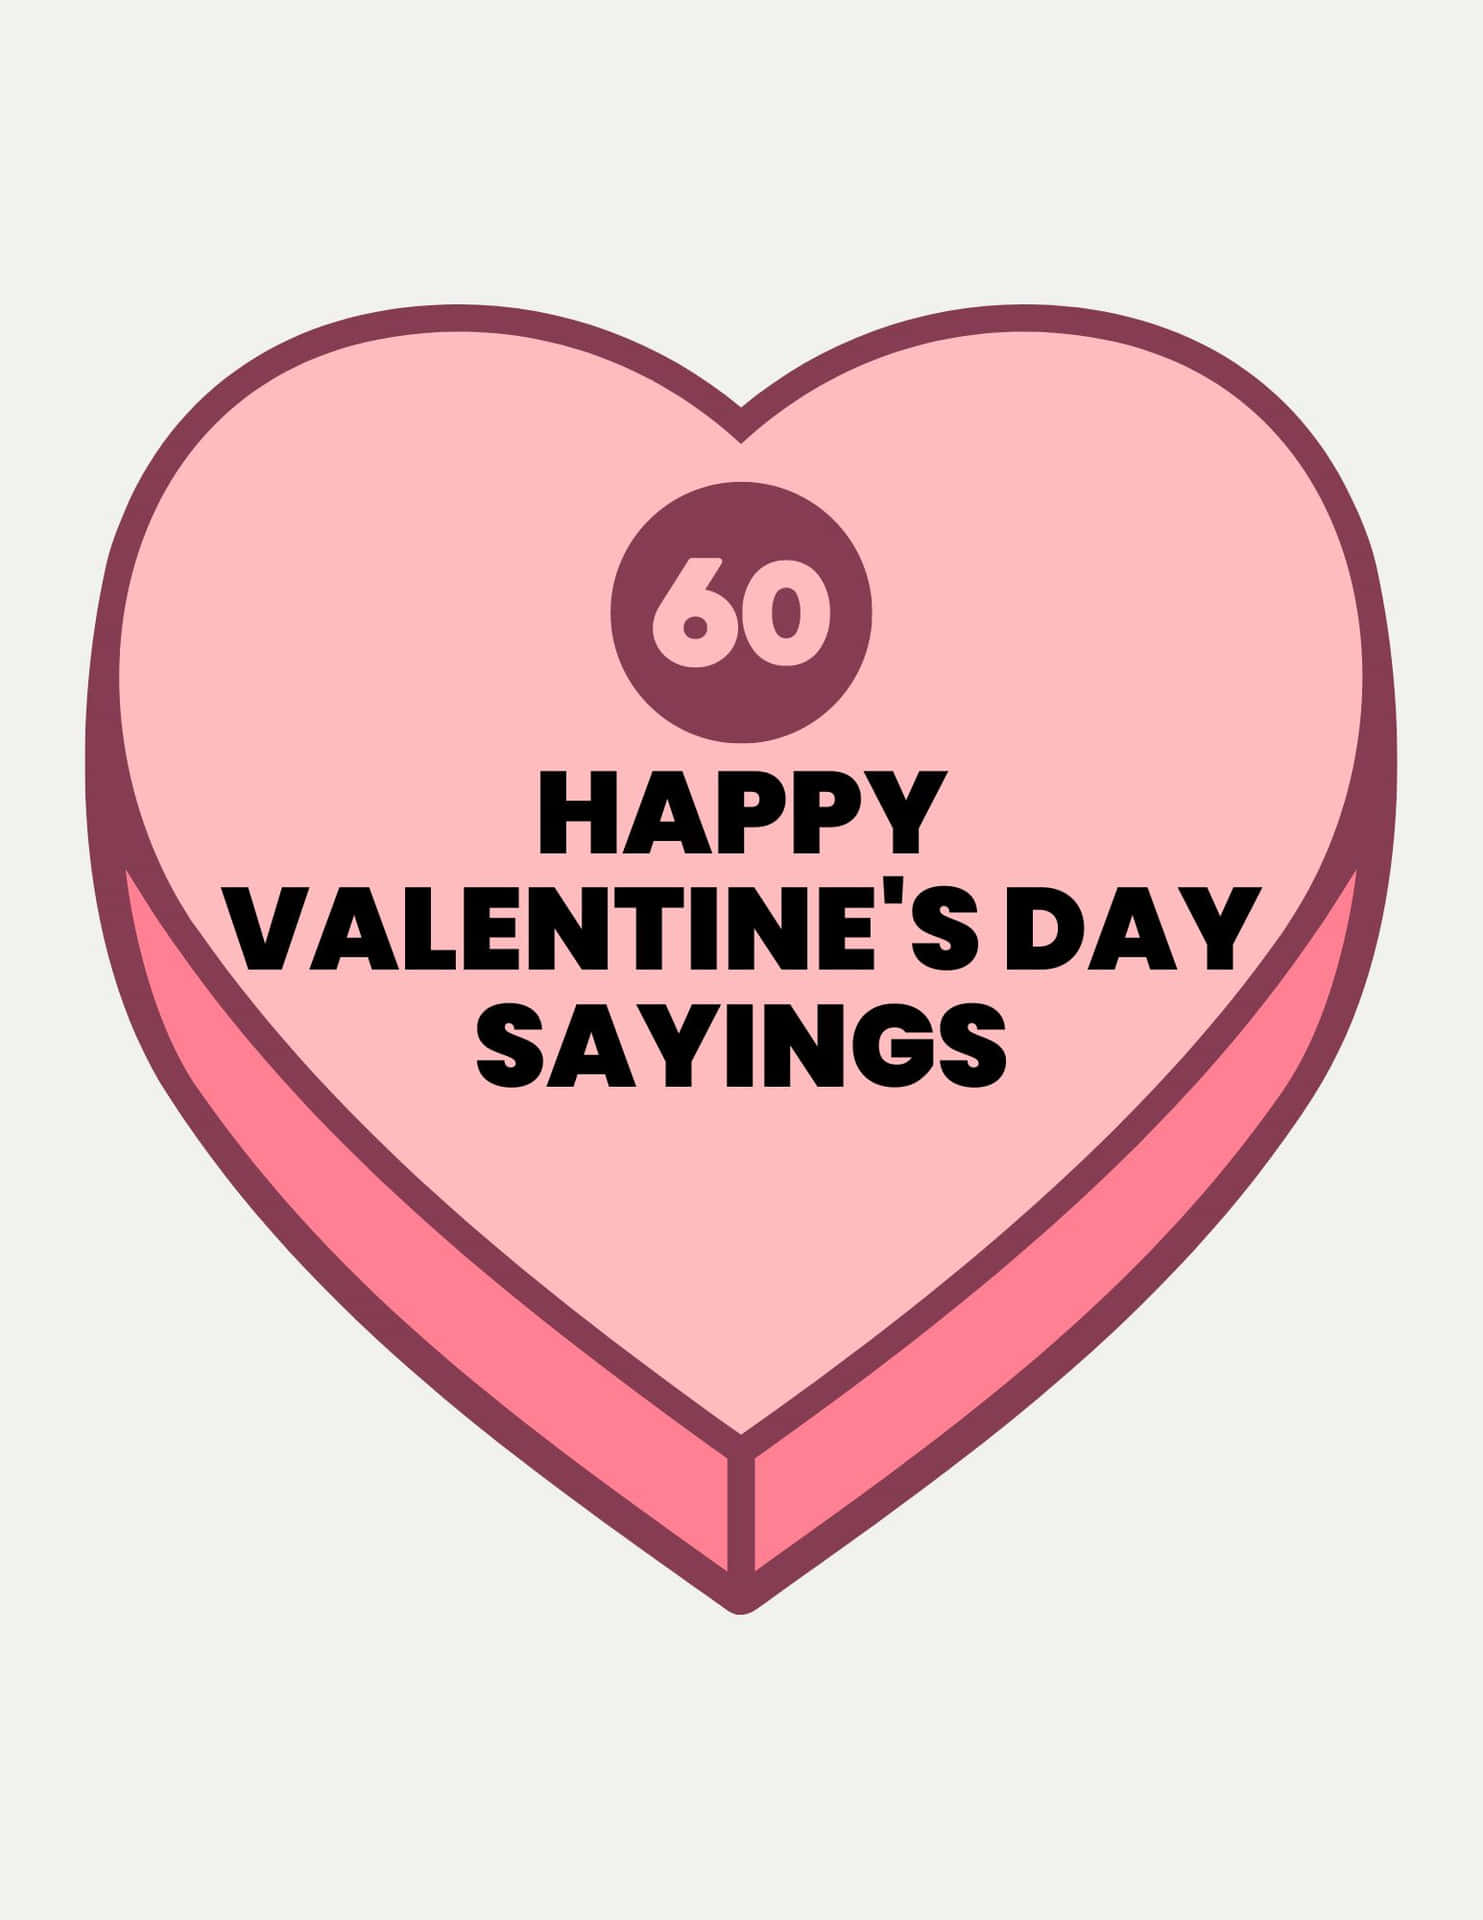 Cute Valentines Pink Heart Valentine's Day Savings Picture